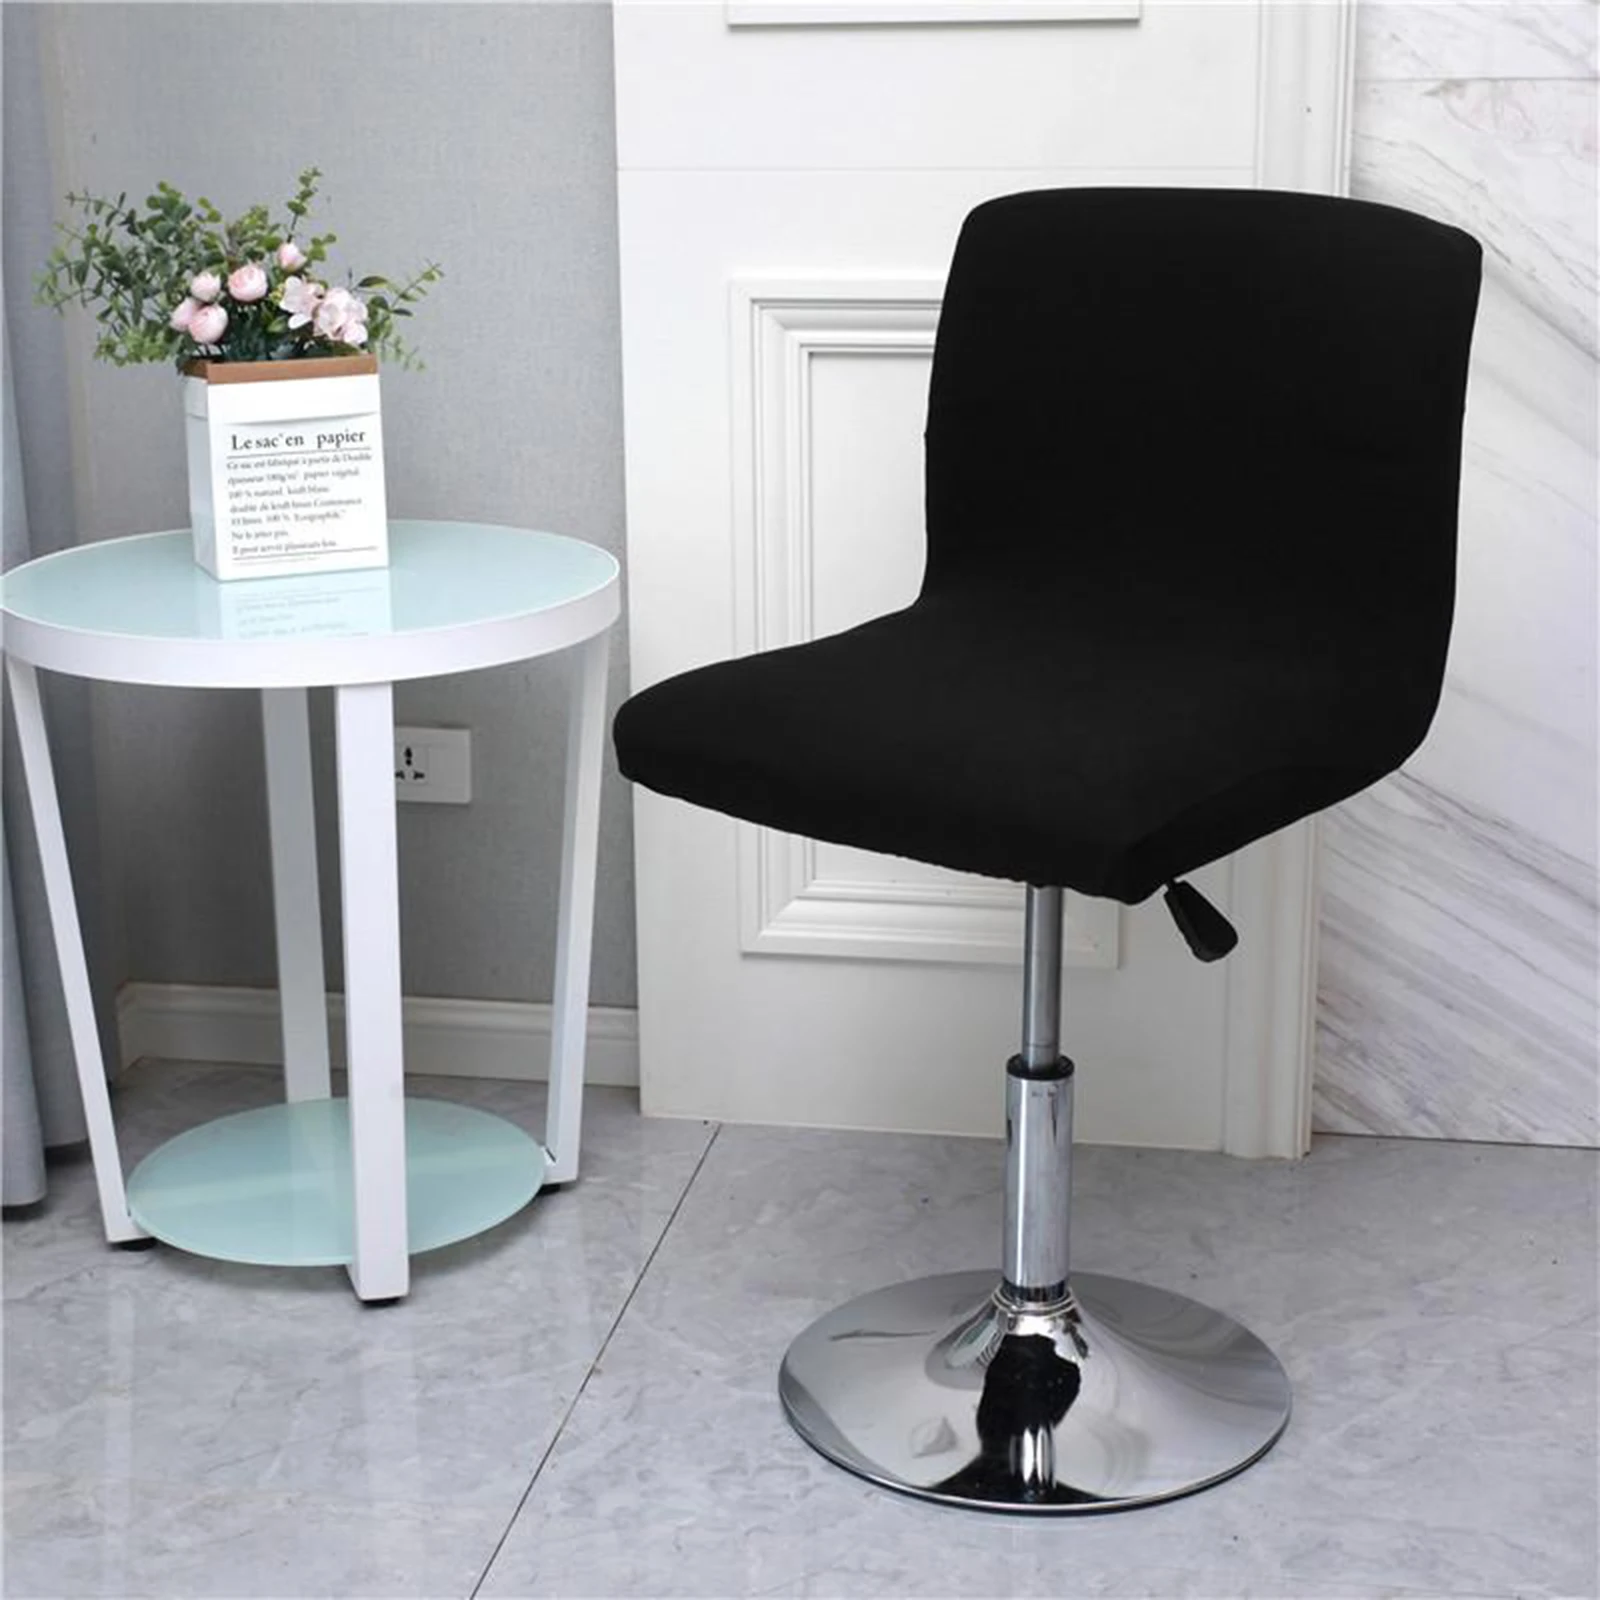 Stool Covers Stretch Bar Stools Seat Cover Barstool Cushion covers for